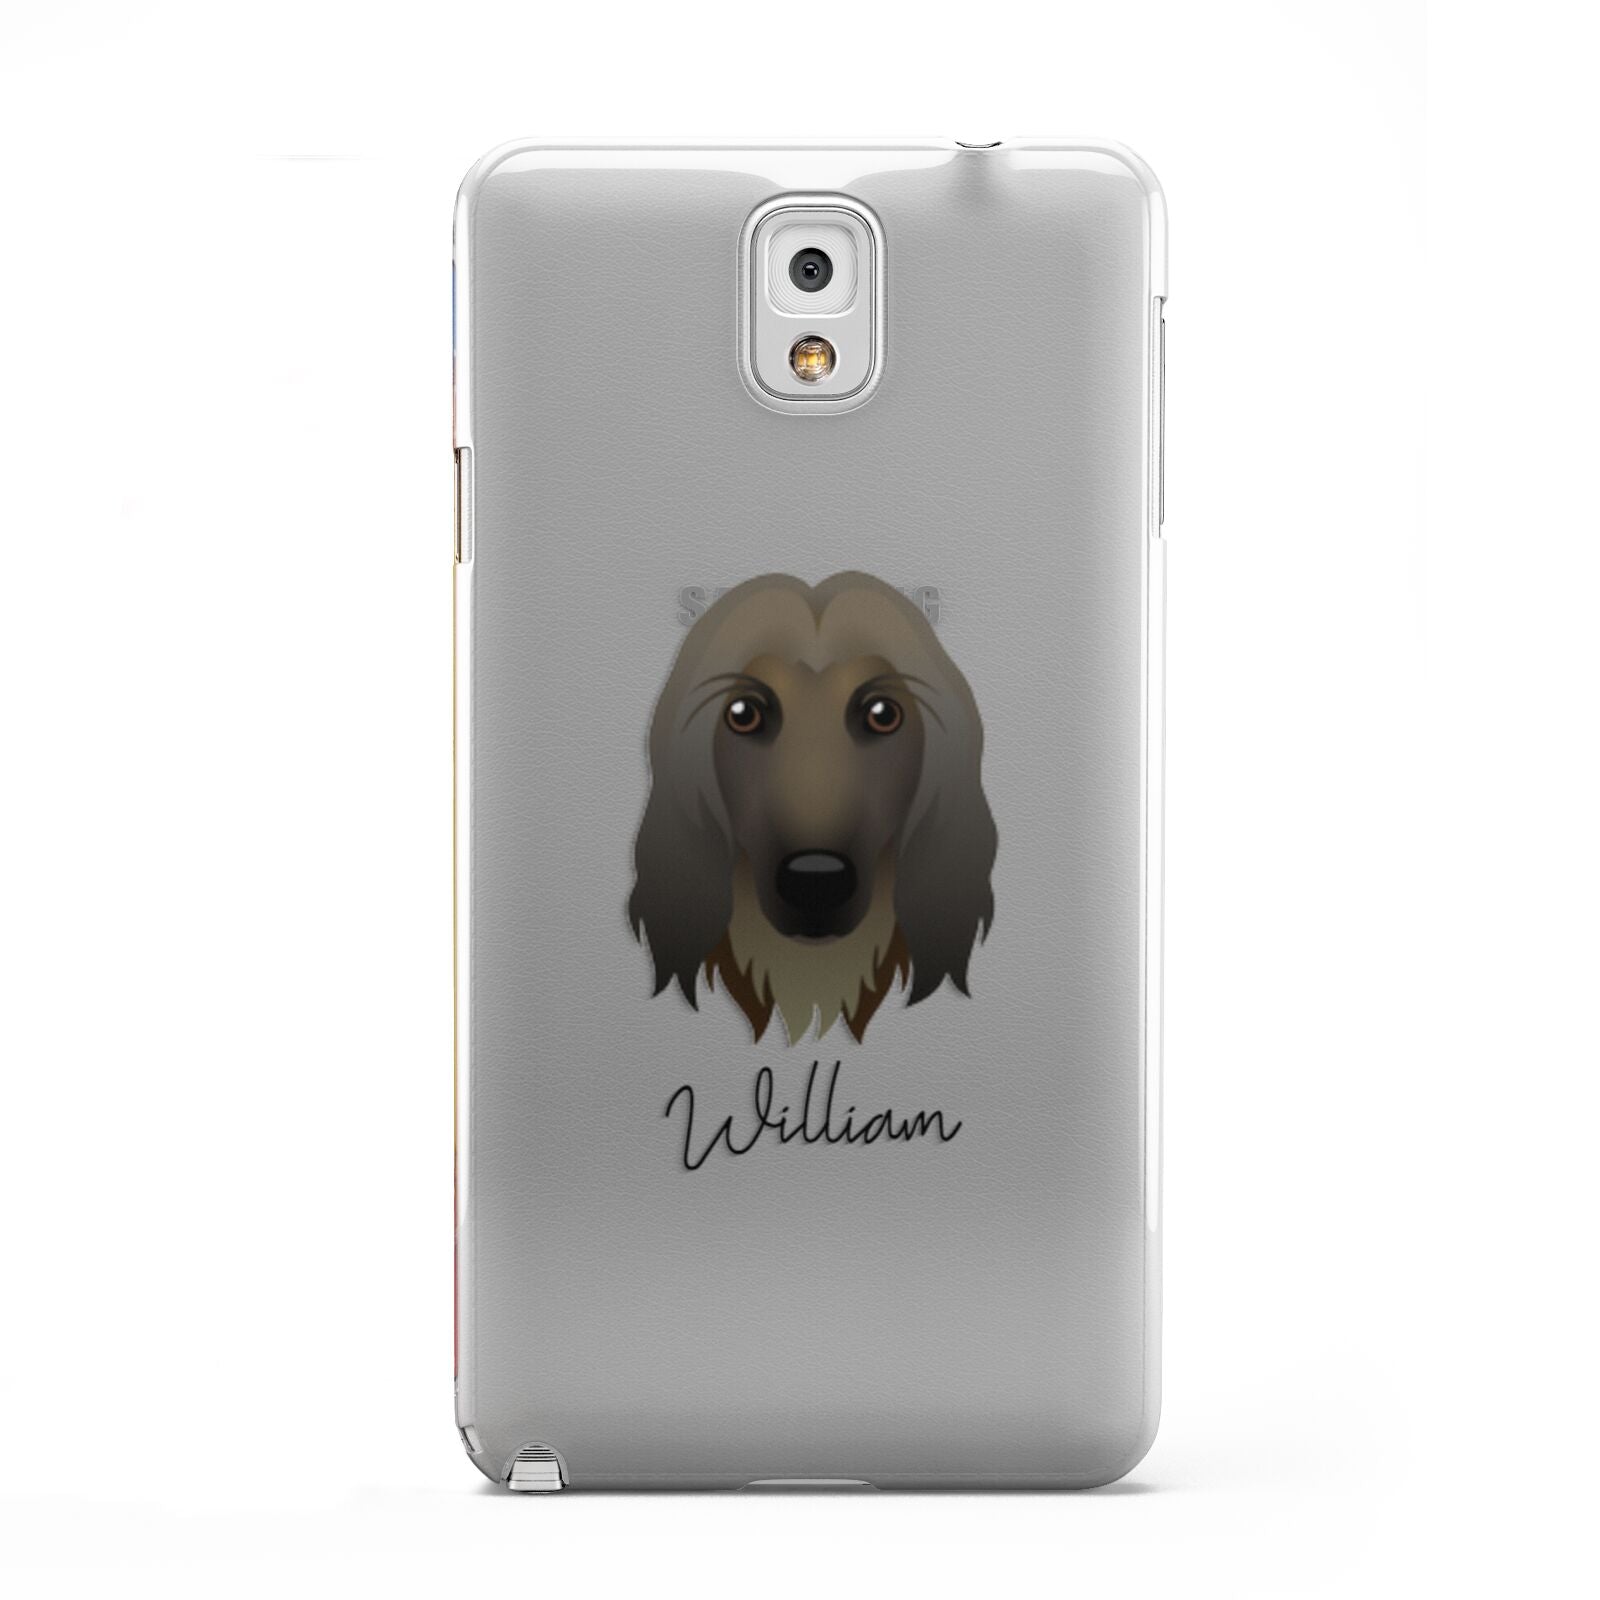 Afghan Hound Personalised Samsung Galaxy Note 3 Case